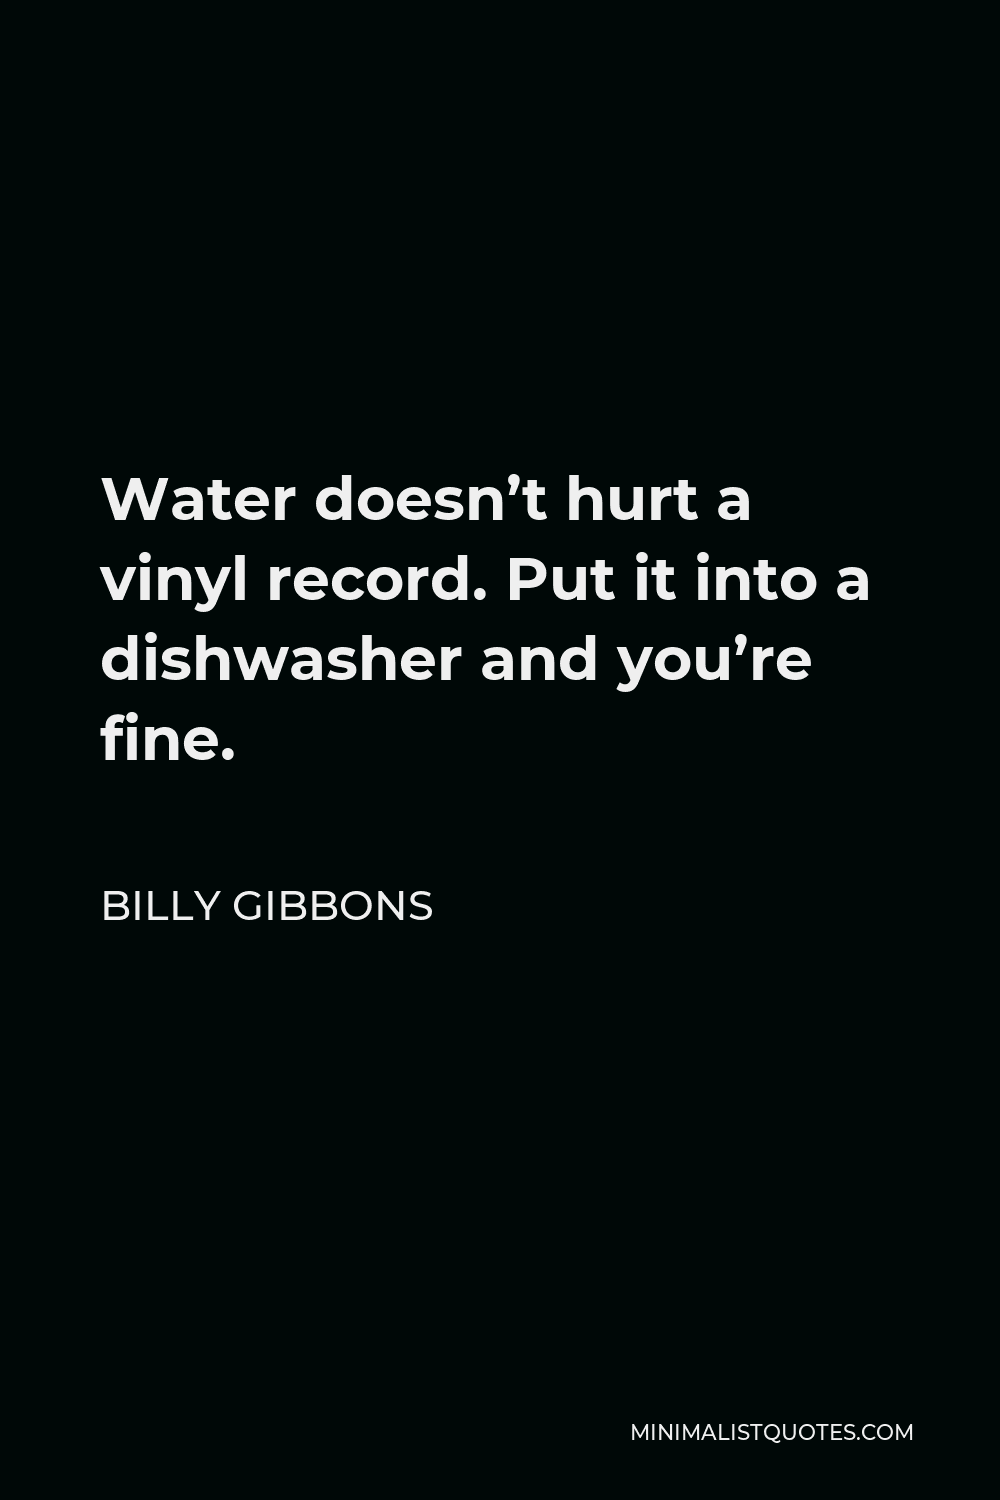 Billy Gibbons Quote - Water doesn’t hurt a vinyl record. Put it into a dishwasher and you’re fine.